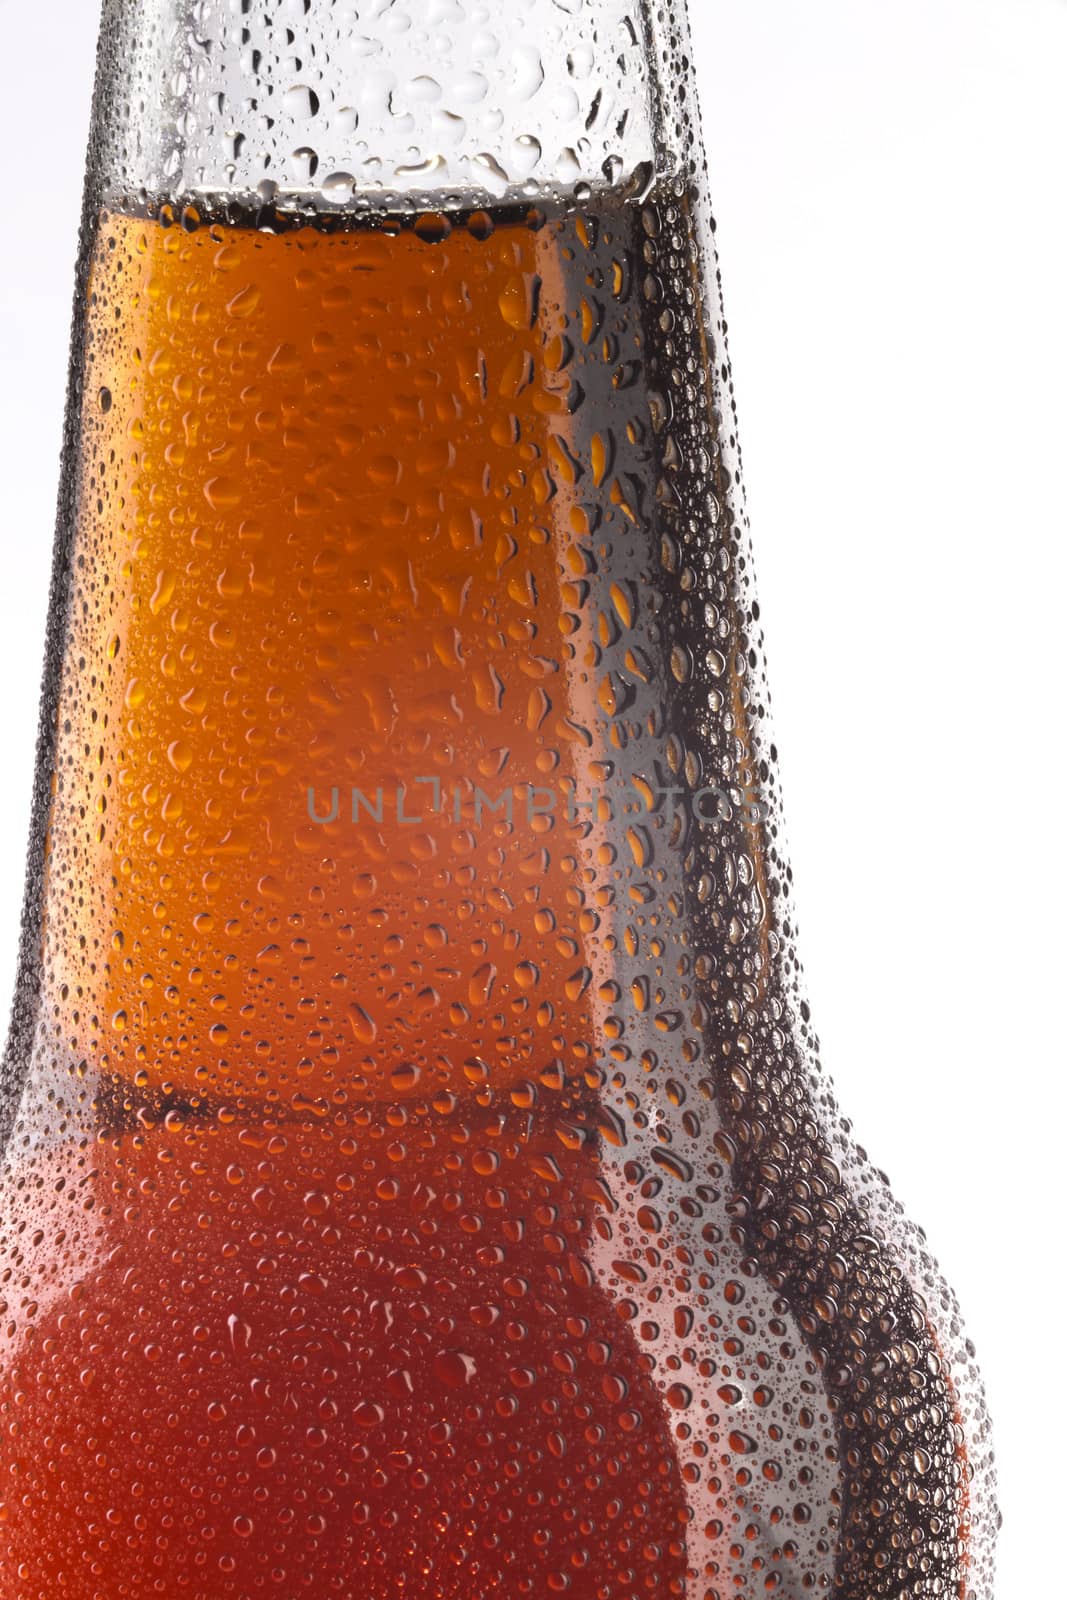 Bottle of beer with droplets close-up